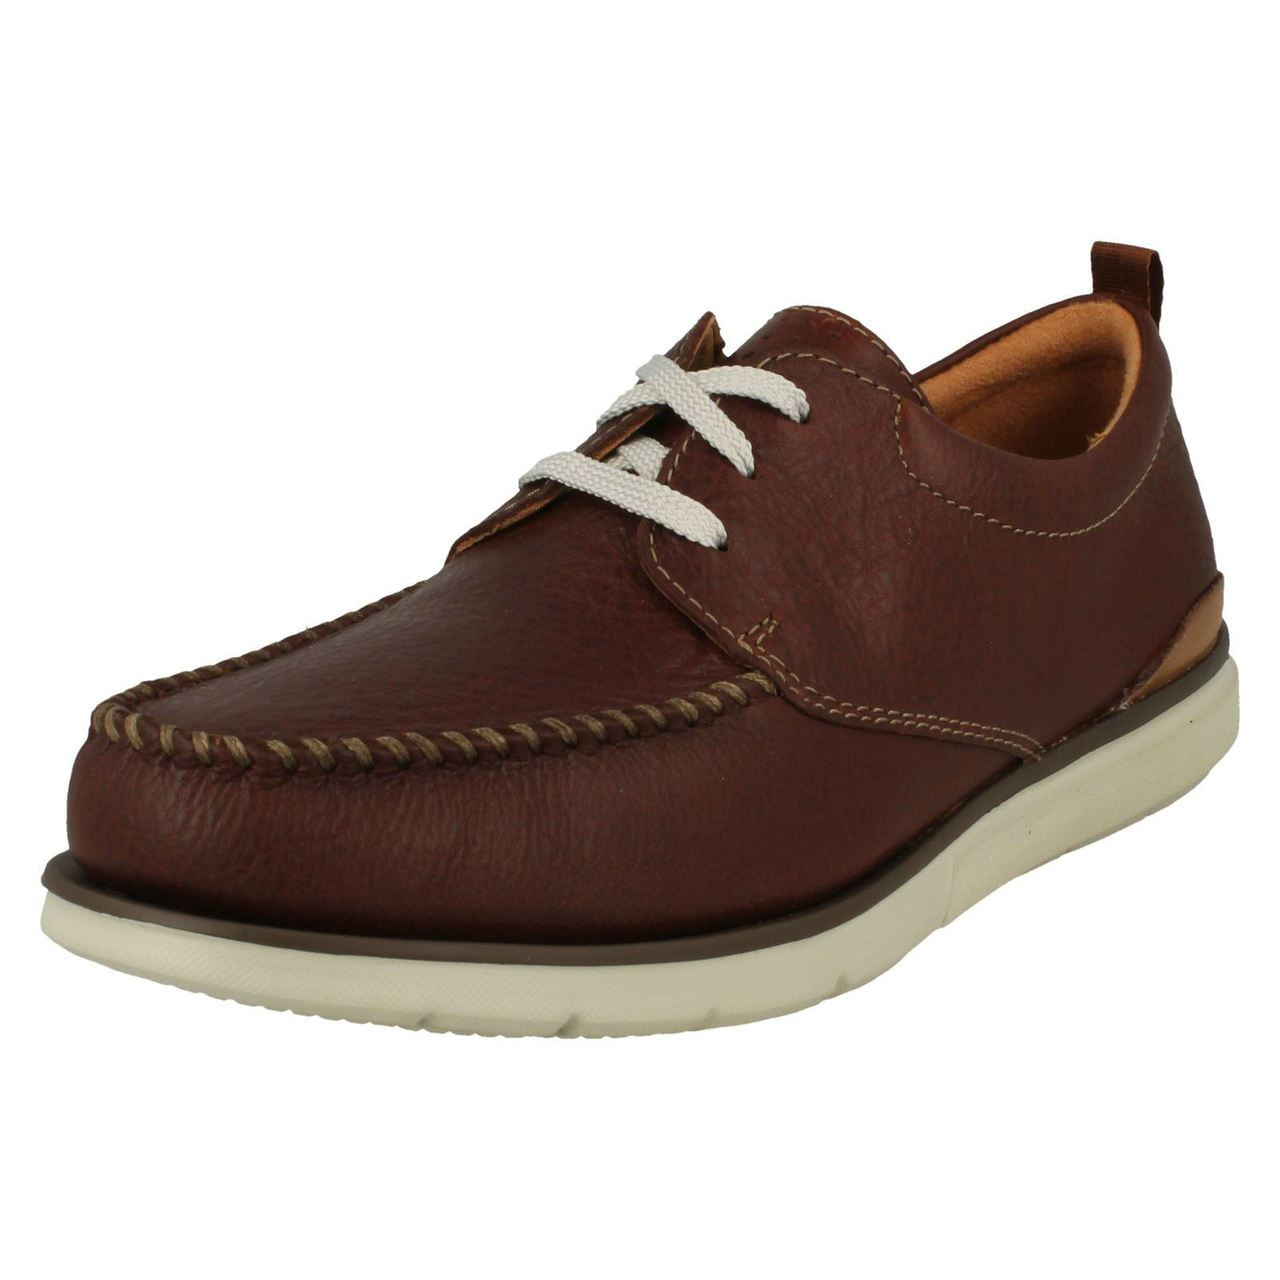 Distraer Cooperación Robar a Mens Clarks Casual Lace Up Shoes Edgewood Mix